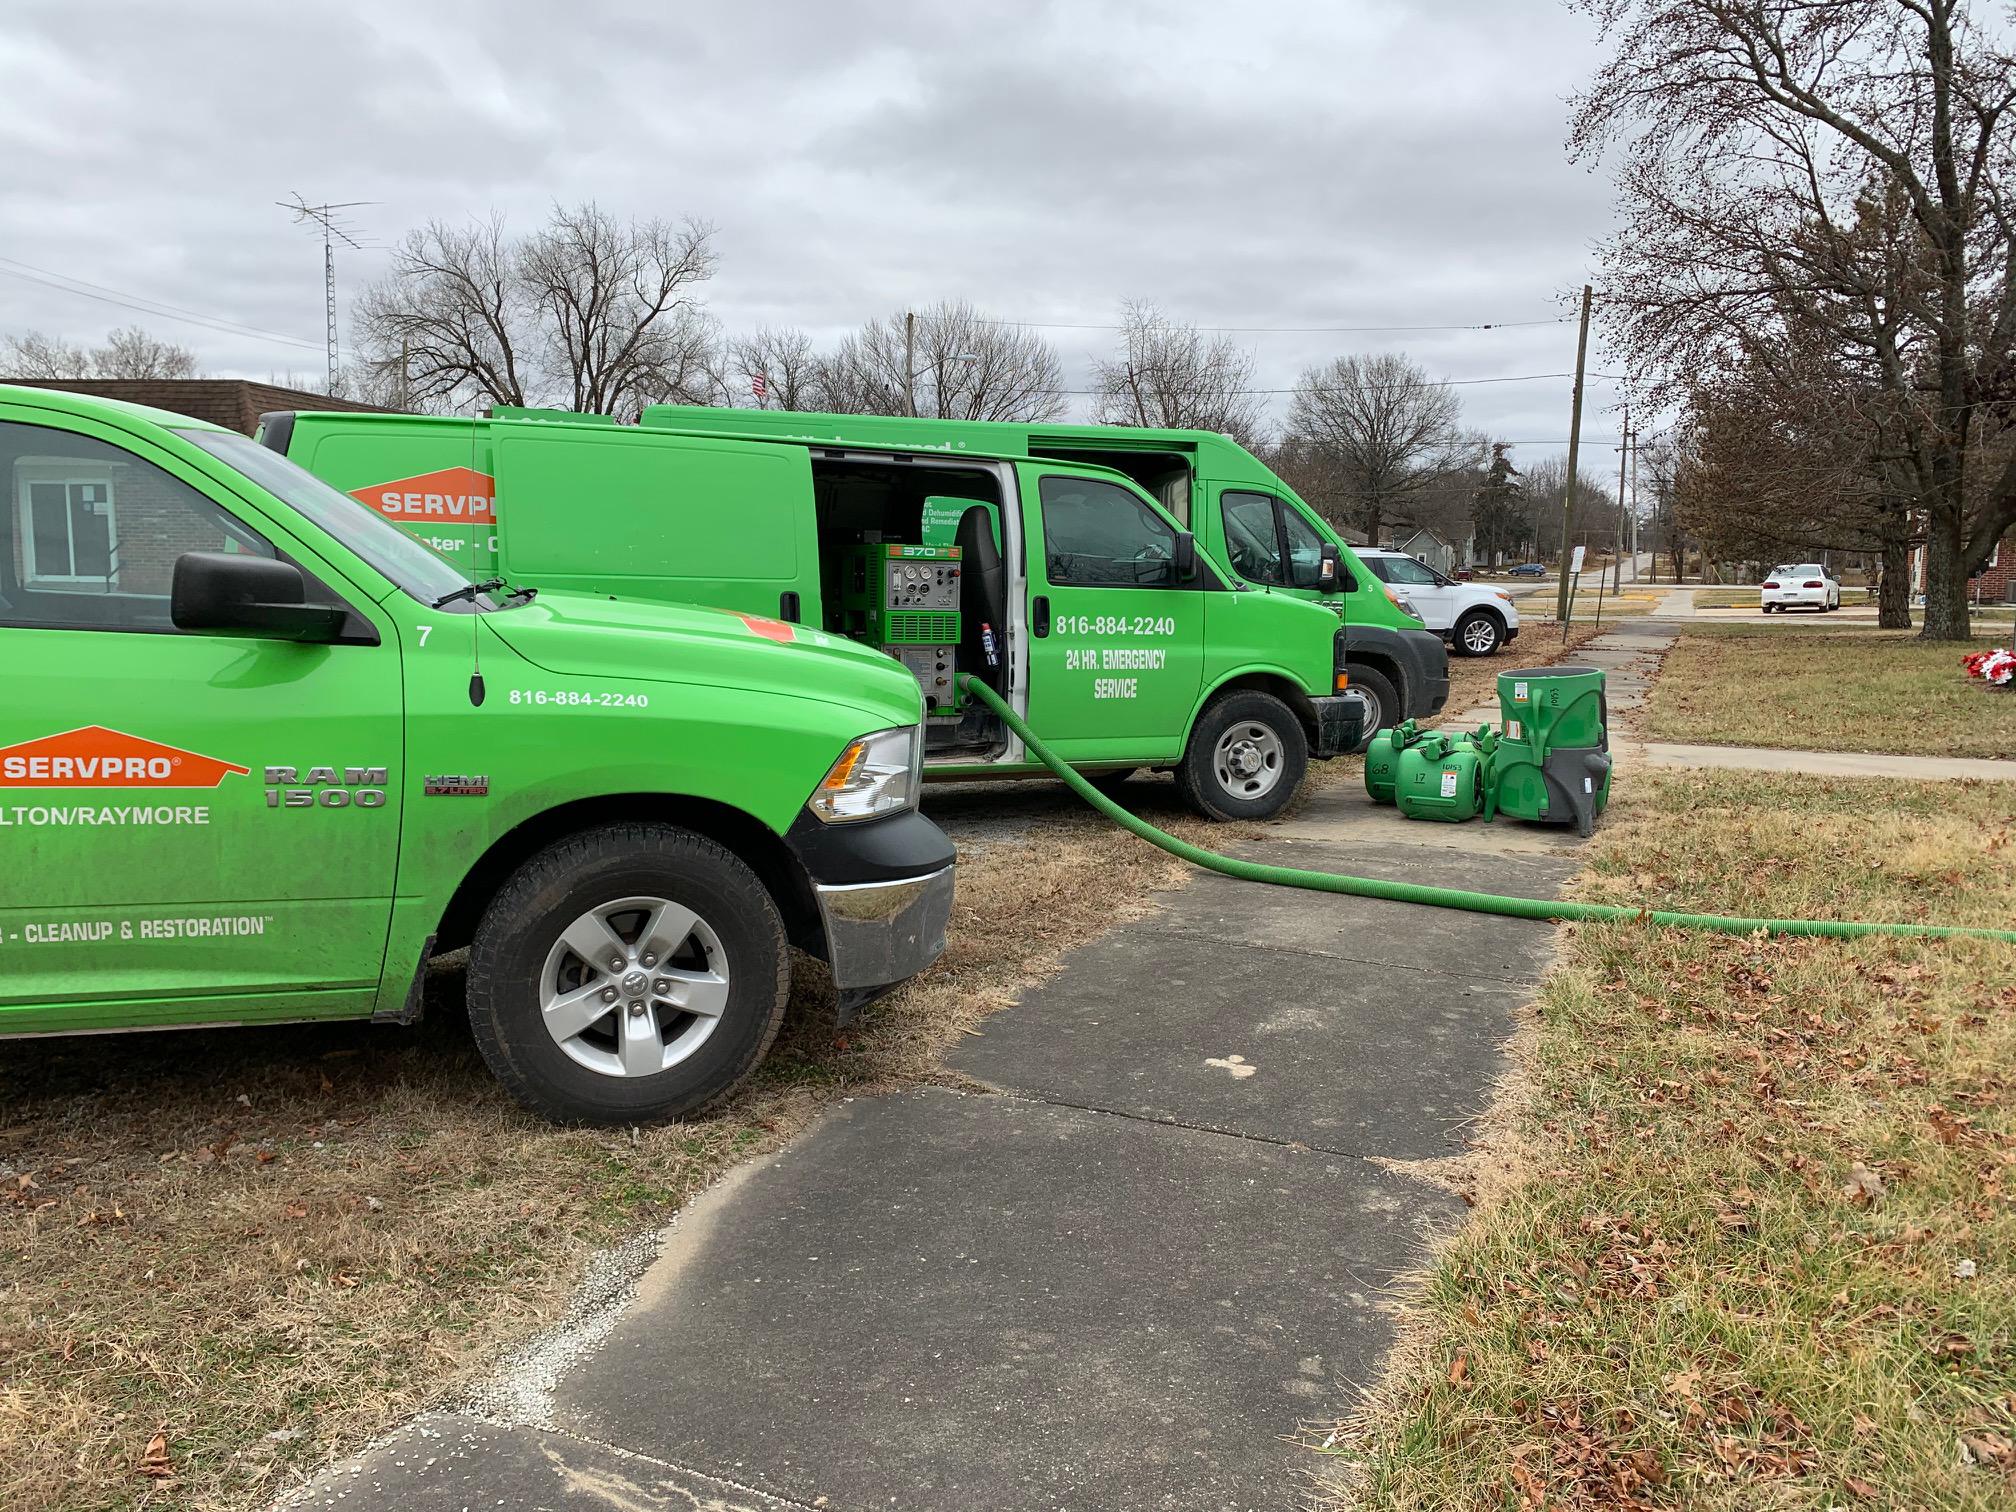 SERVPRO of Harrisonville/Belton/Raymore is available 24/7 for emergency services.